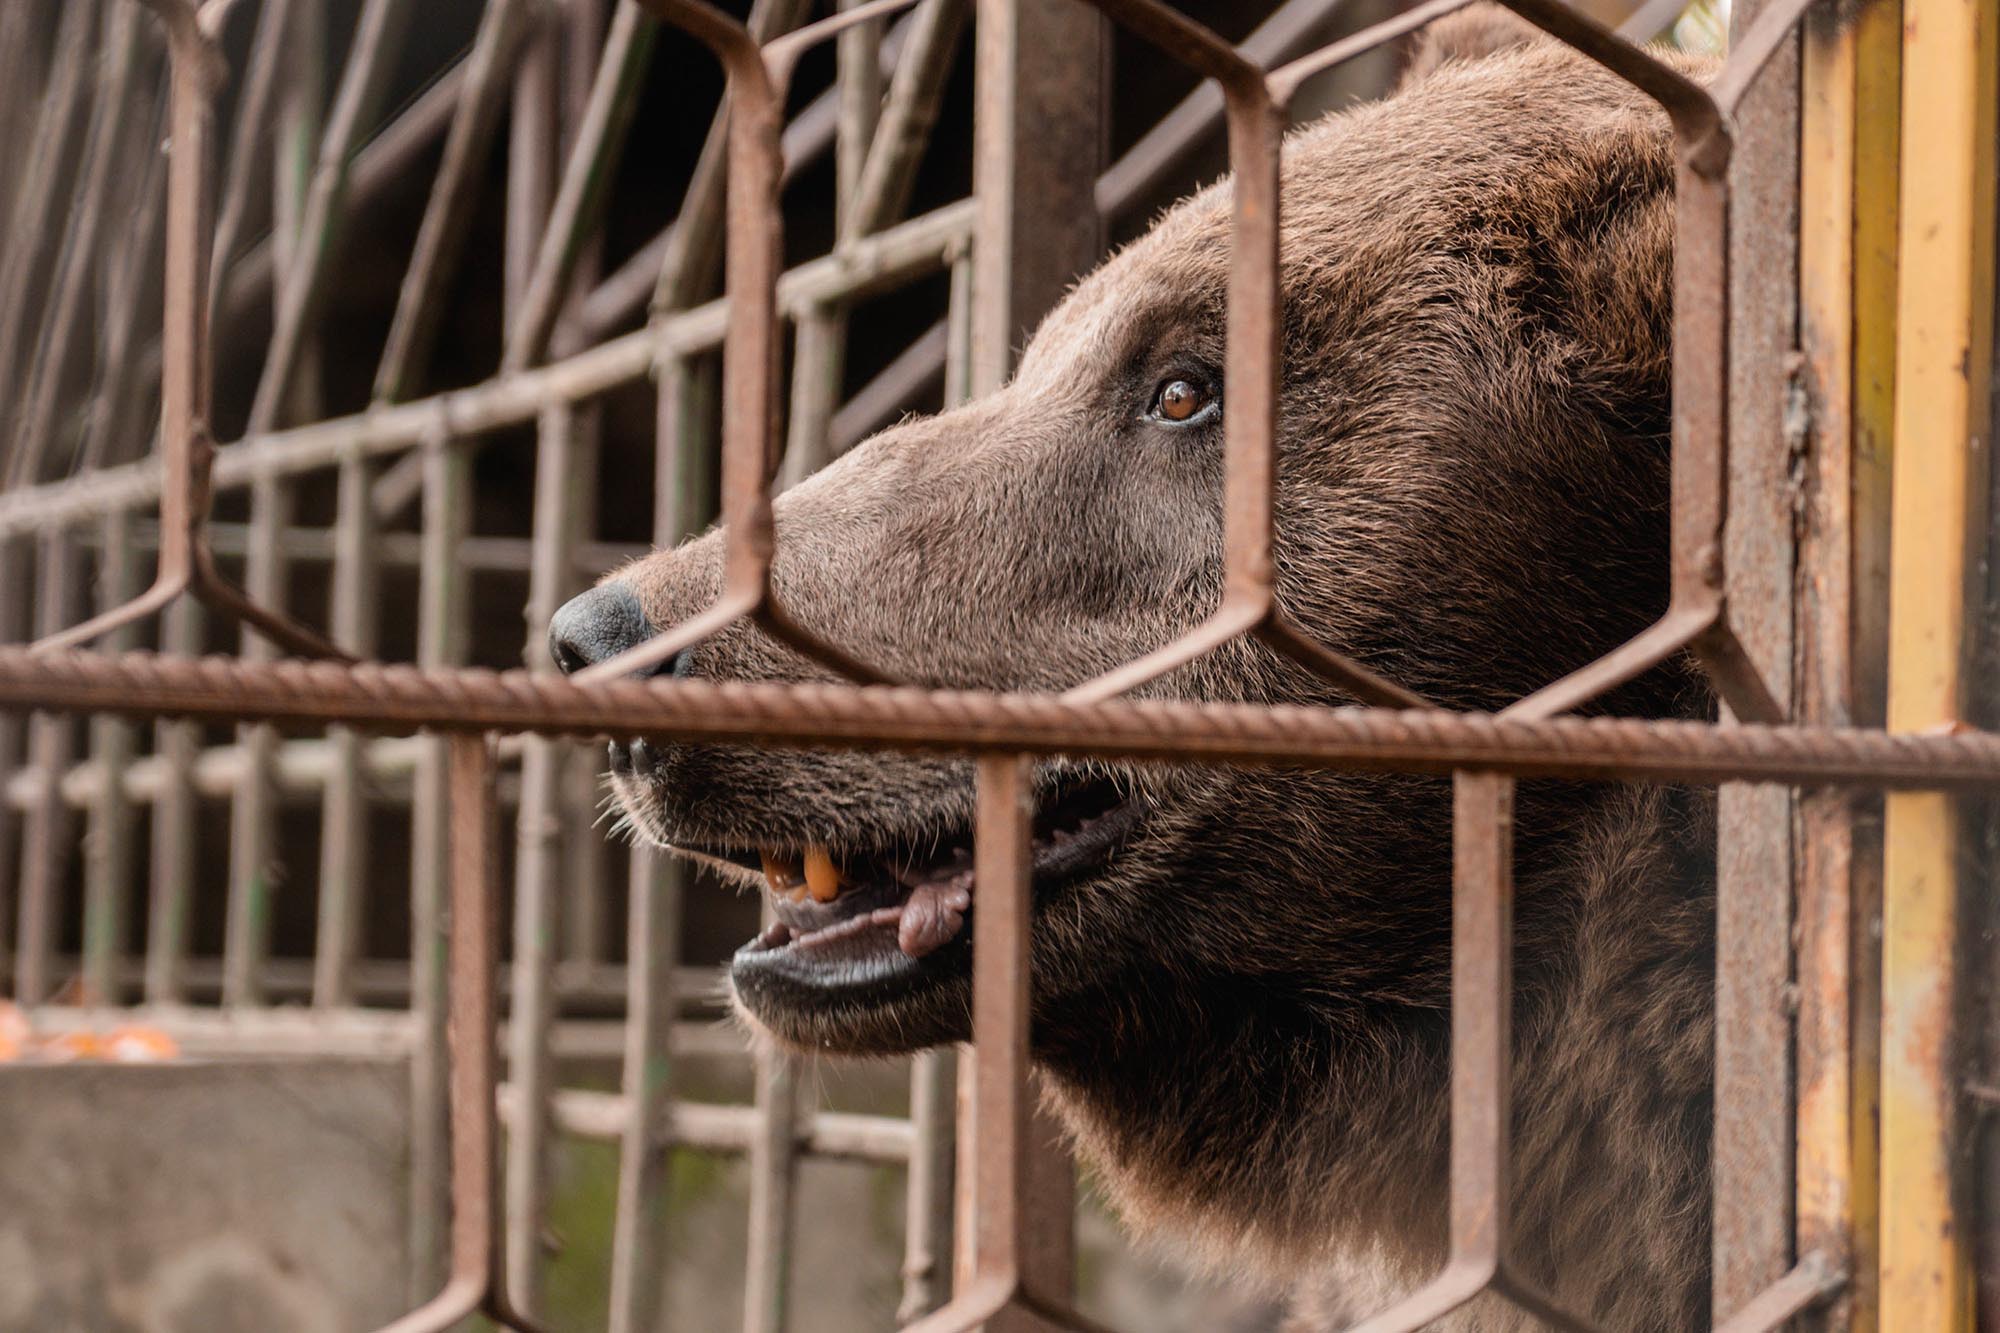 Bear In War Torn Ukraine Rescued And Taken To Animal Sanctuary After Over 20 Years Spent In Concrete Cage